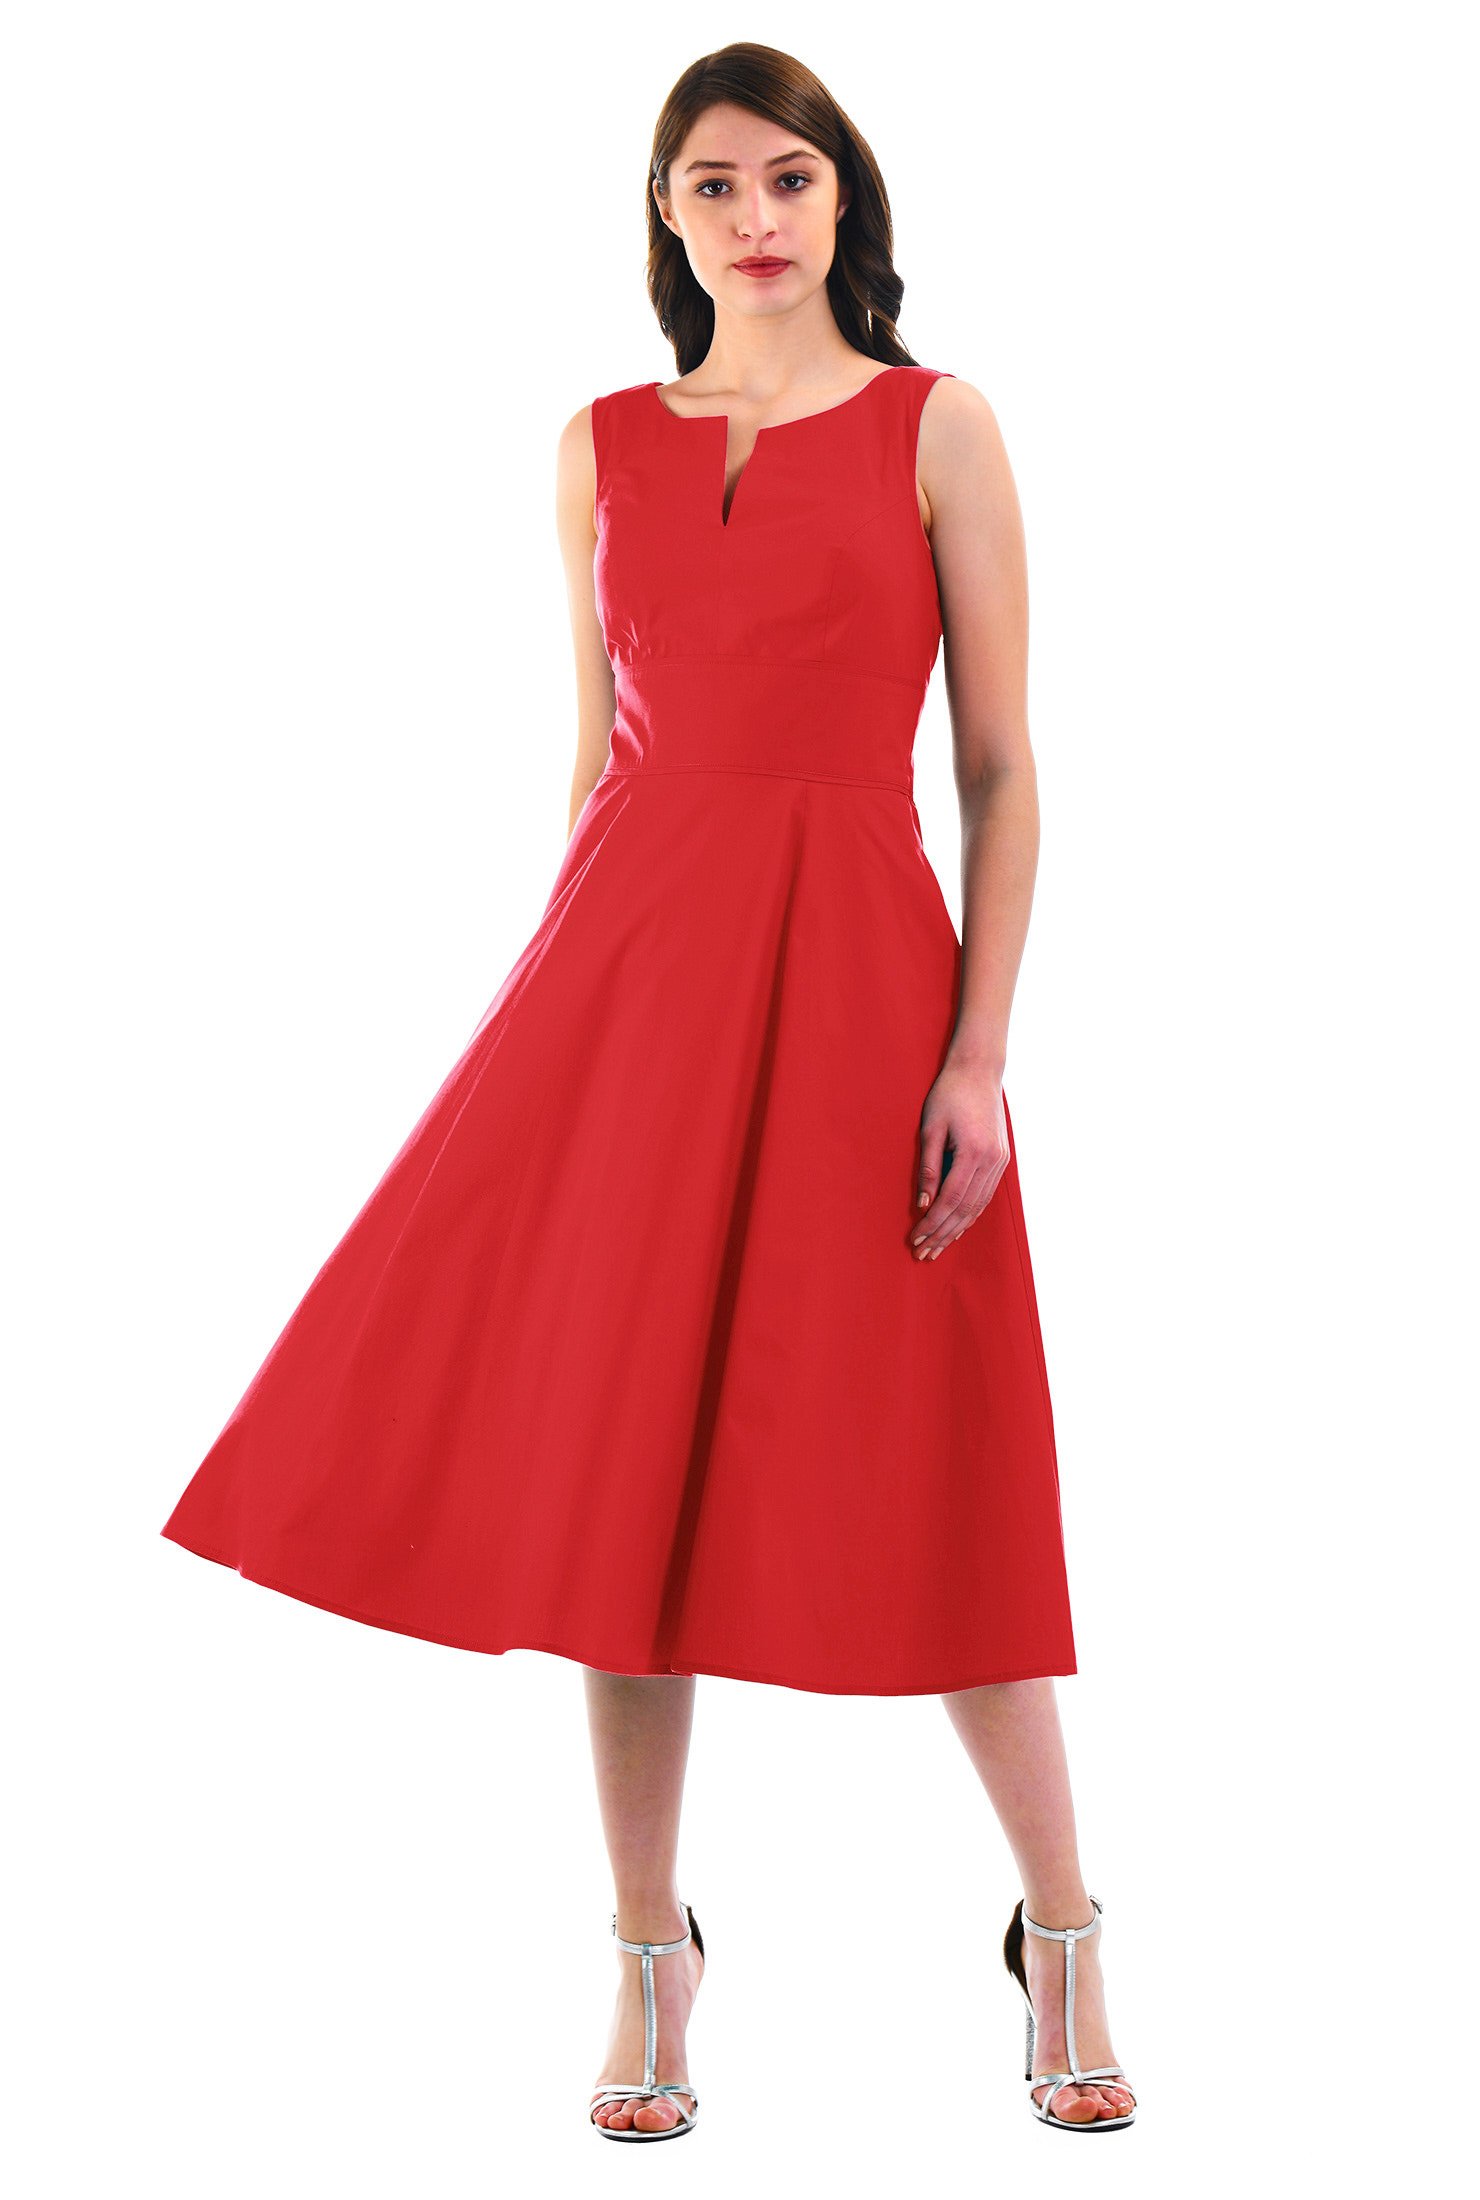 Sew-Along B6168 Fit-and-Flare Dress, Blog